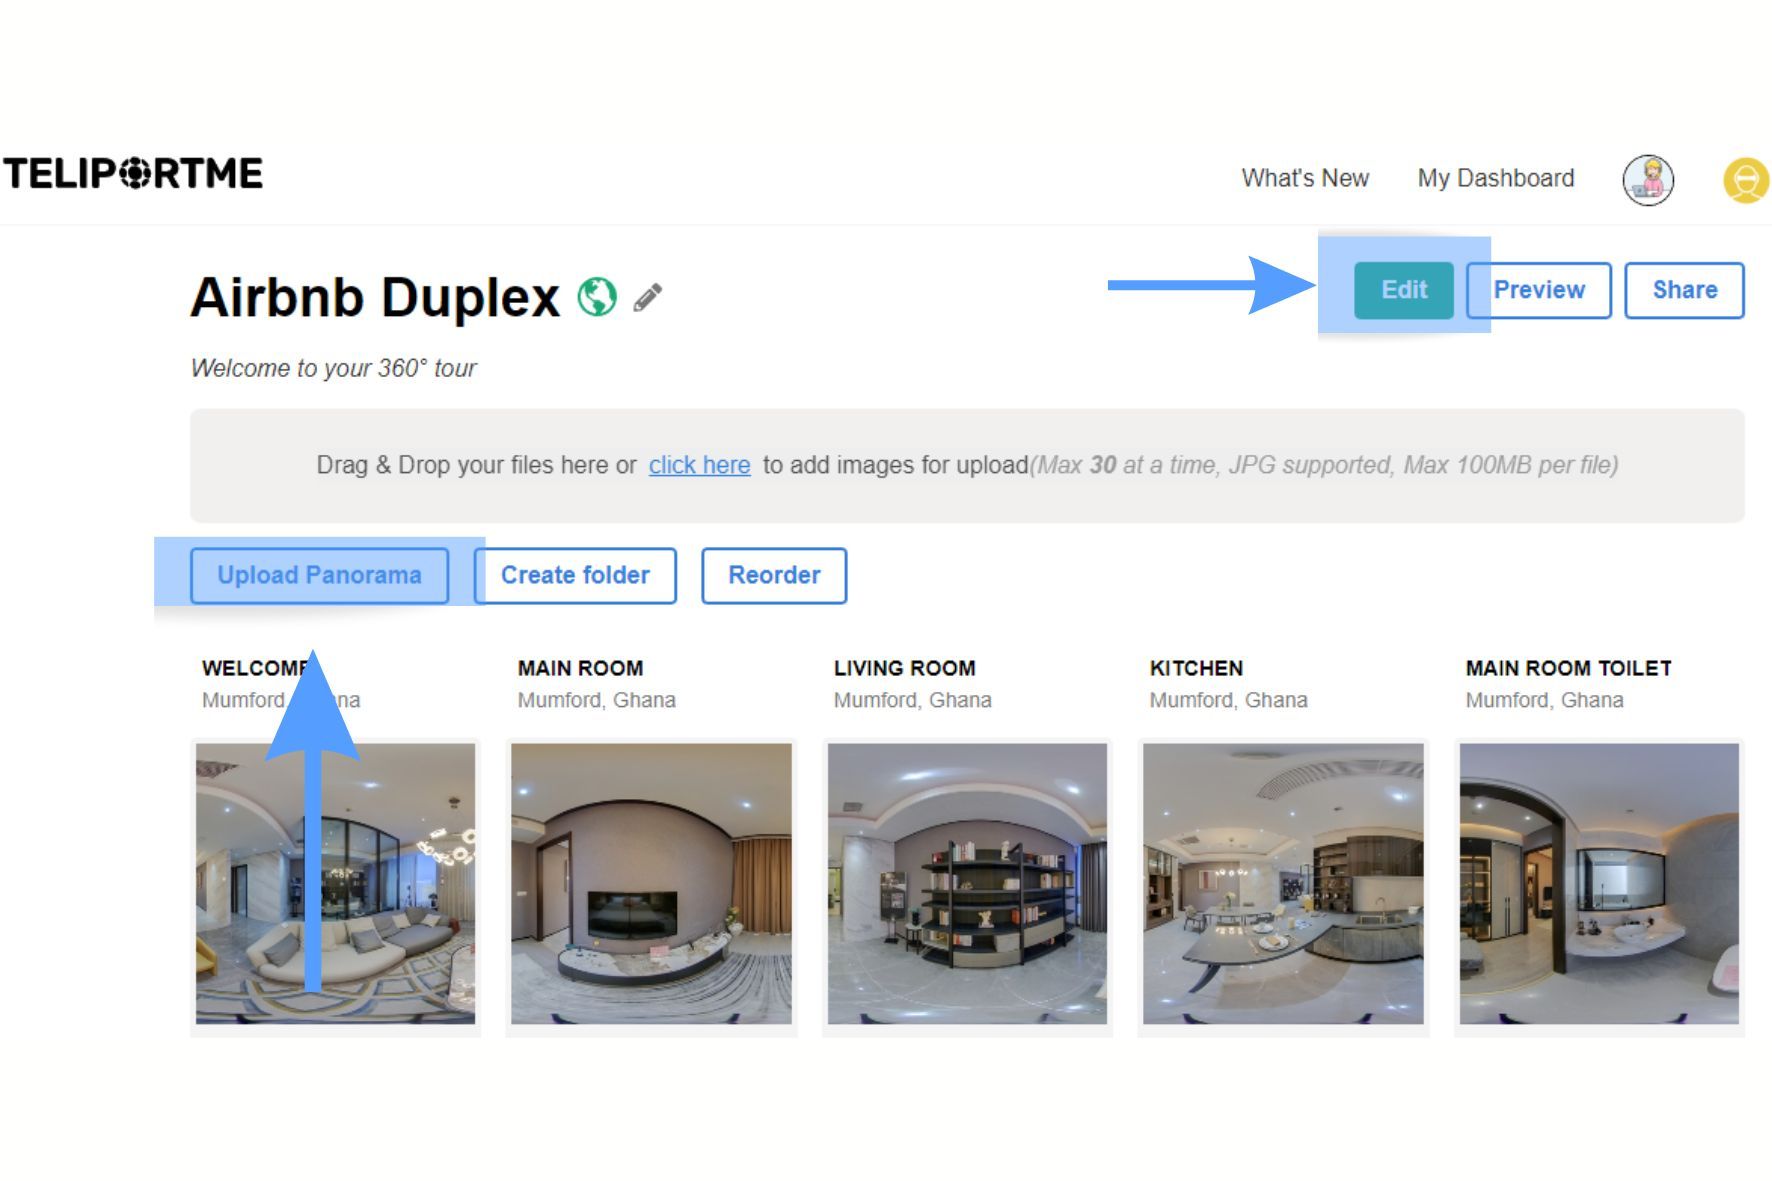 How to Add Virtual Tours to MLS (Multiple Listing Service)